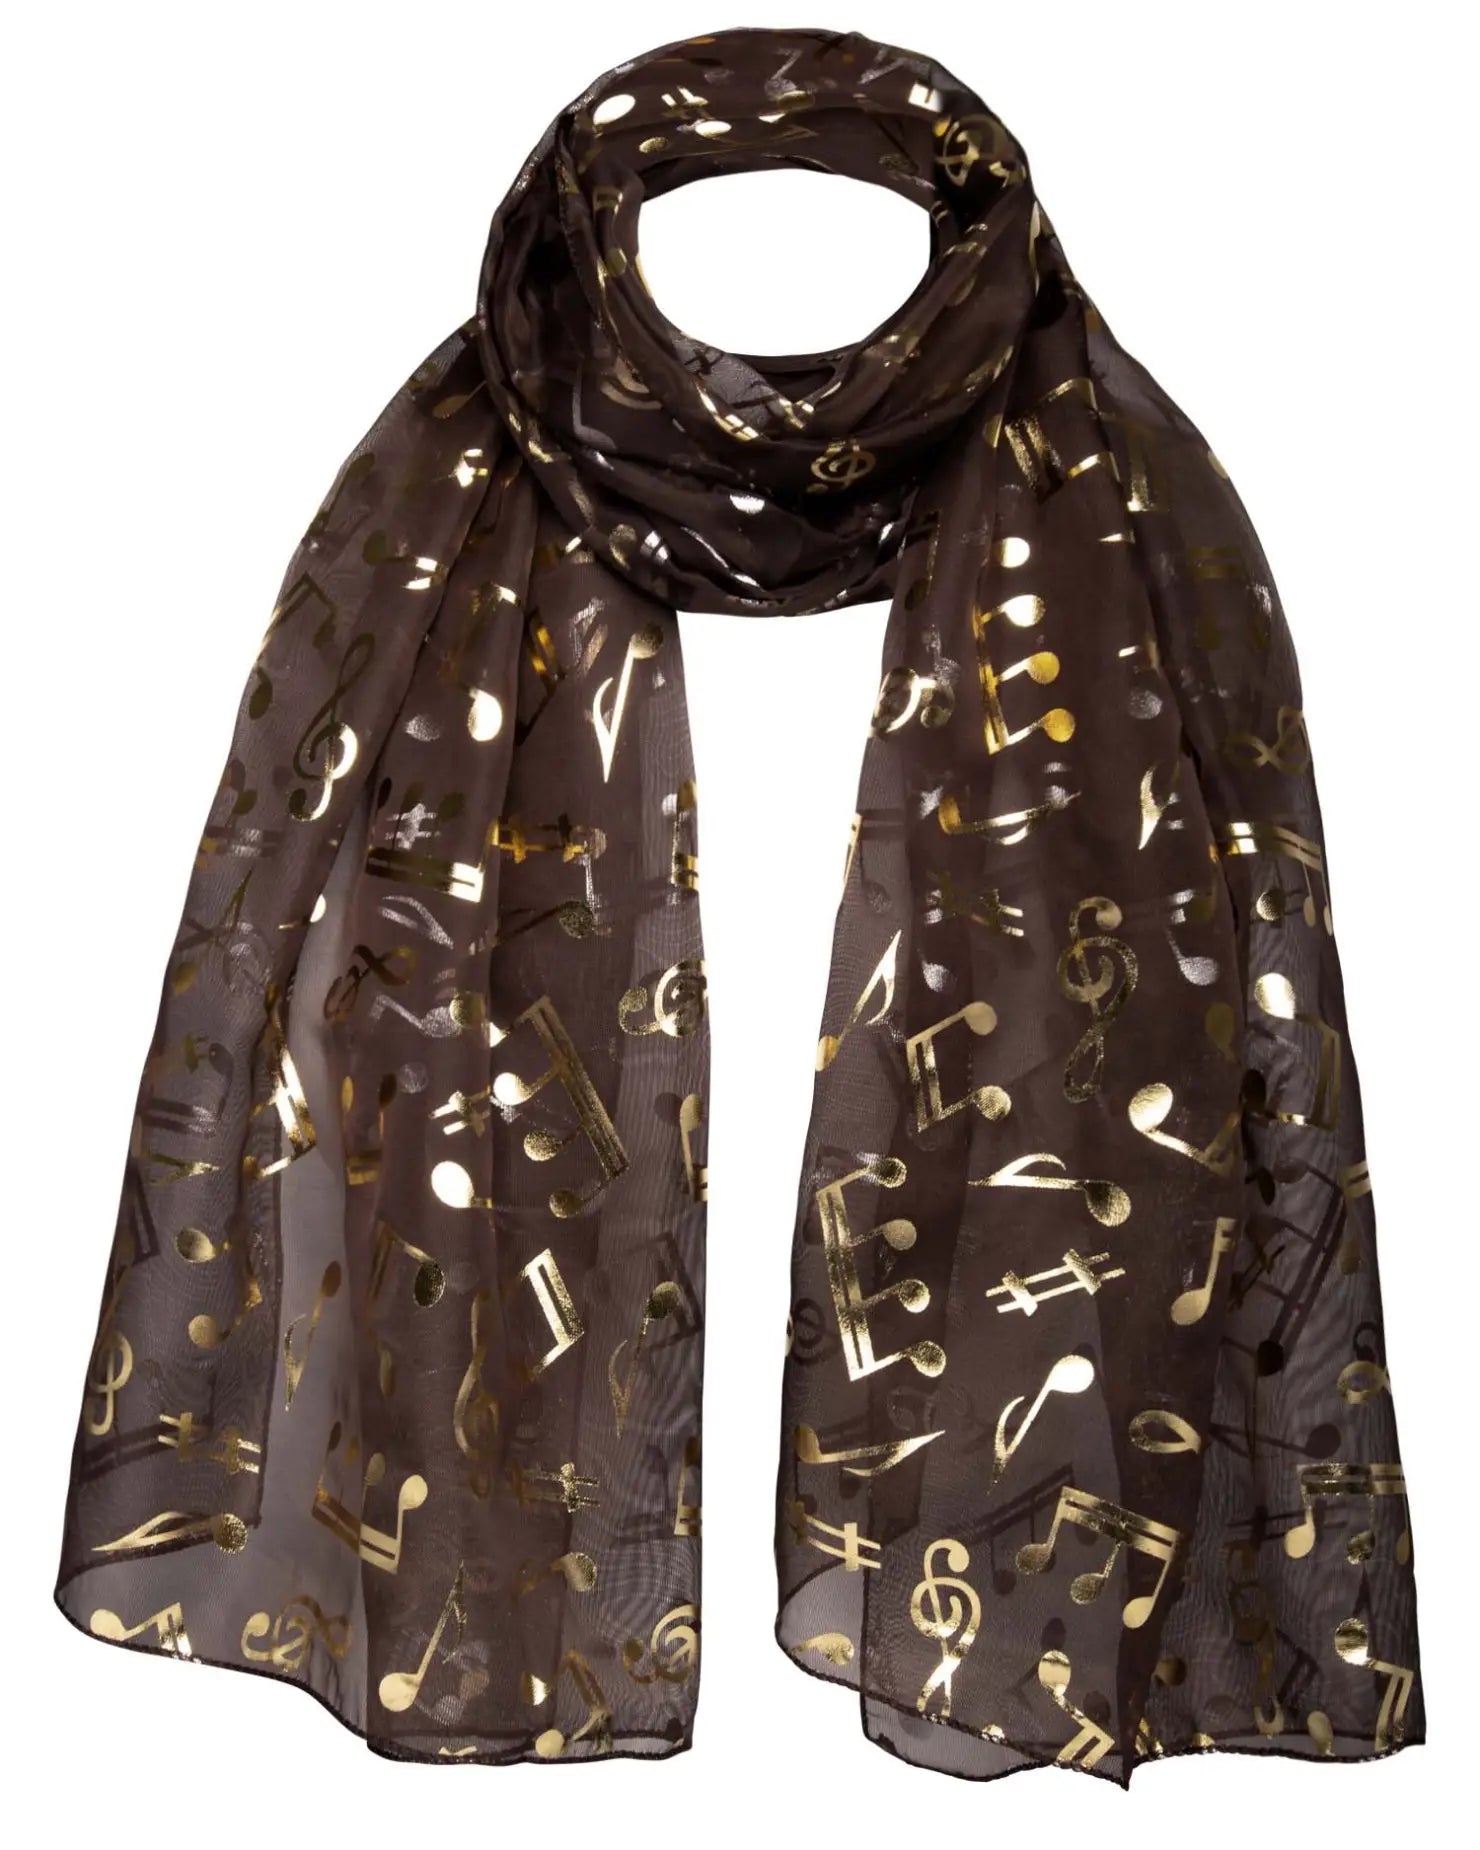 Gold Foil Music Note Chiffon Scarf with brown color and musical notes